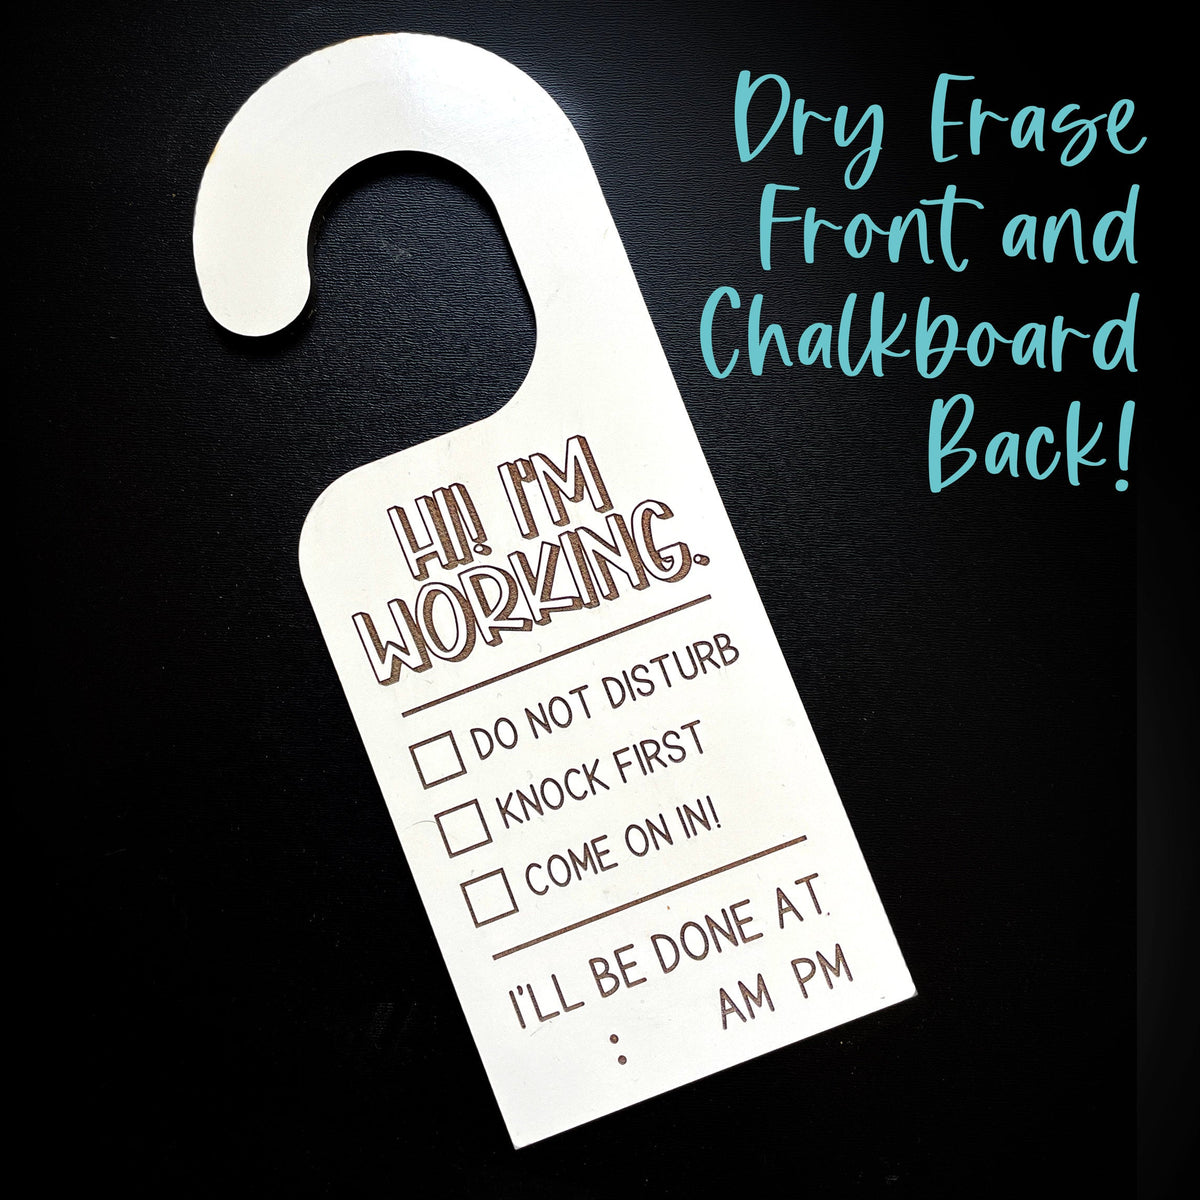 Work from Home Door Sign - Whiteboard Hanger with Chalkboard Back